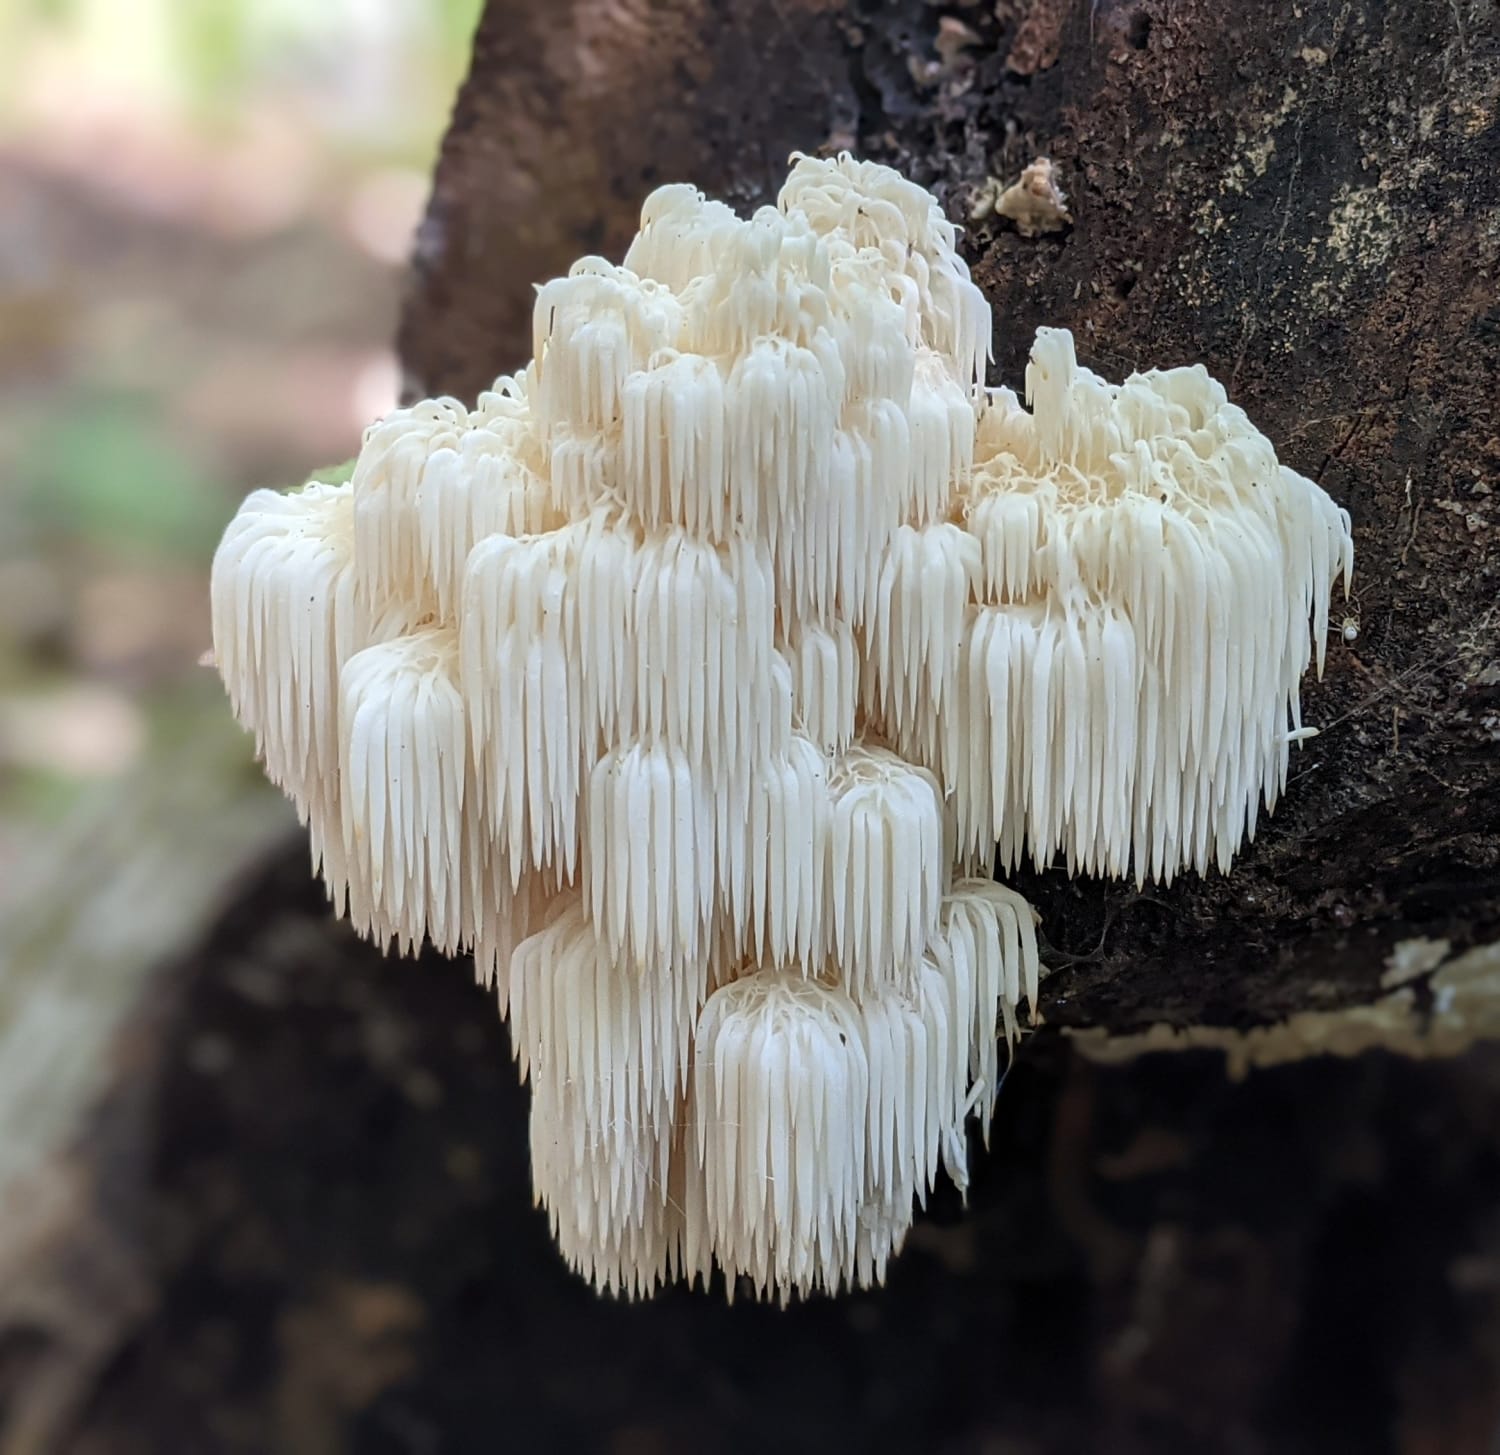 I found this Lion's Mane fungus on a hike today in central Massachusetts